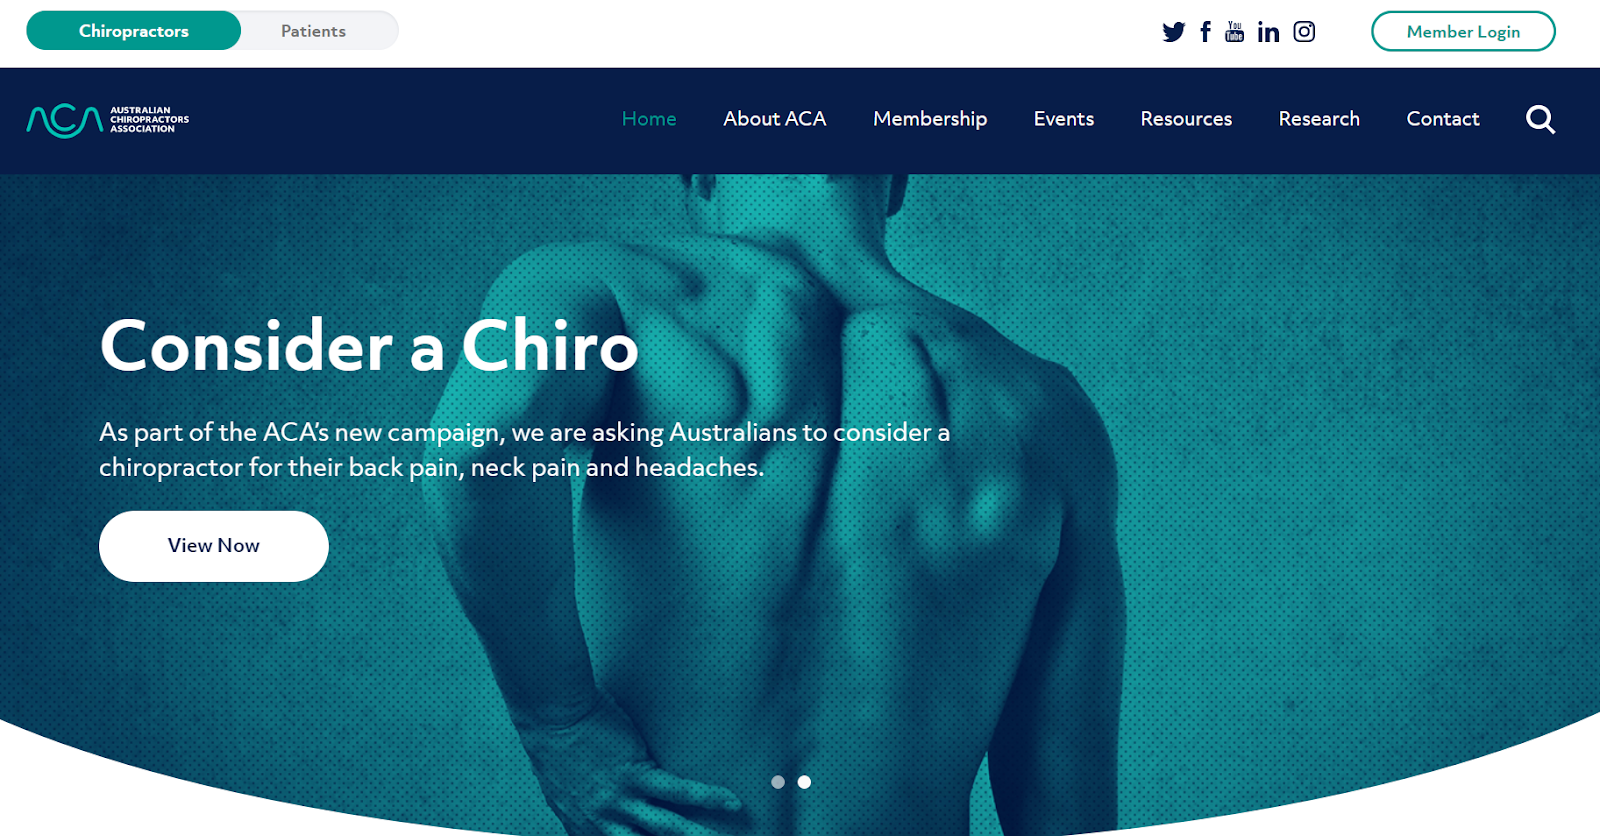 26 Chiropractor Website Design Examples We Love   How To Make Your Own